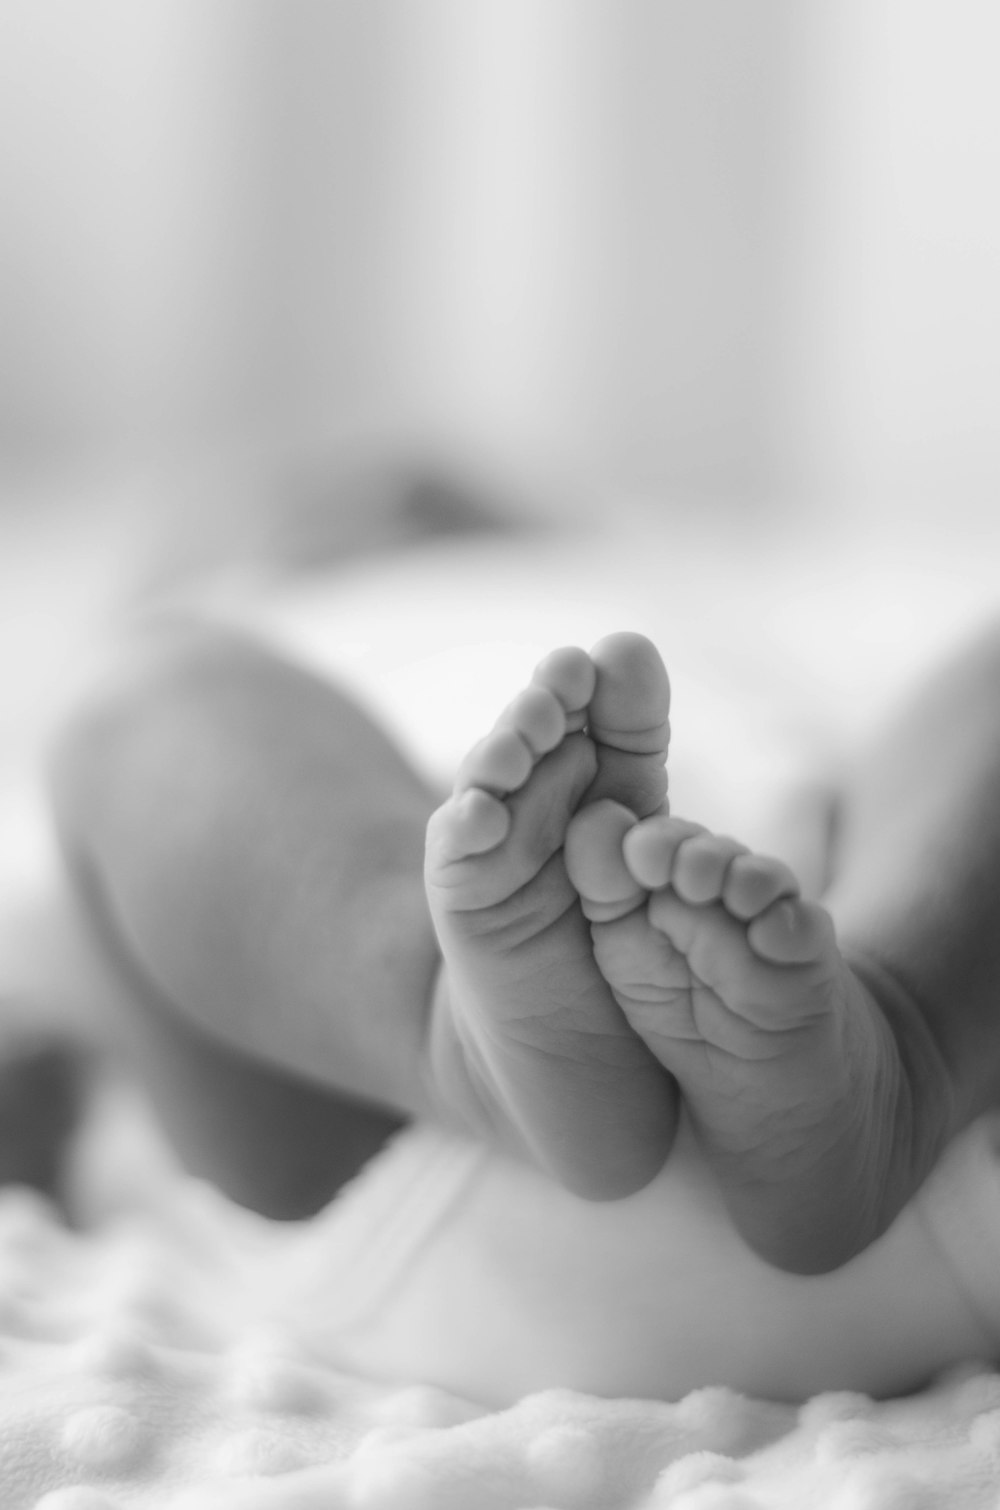 Baby's foot, low section (3-6 months), close-up stock photo